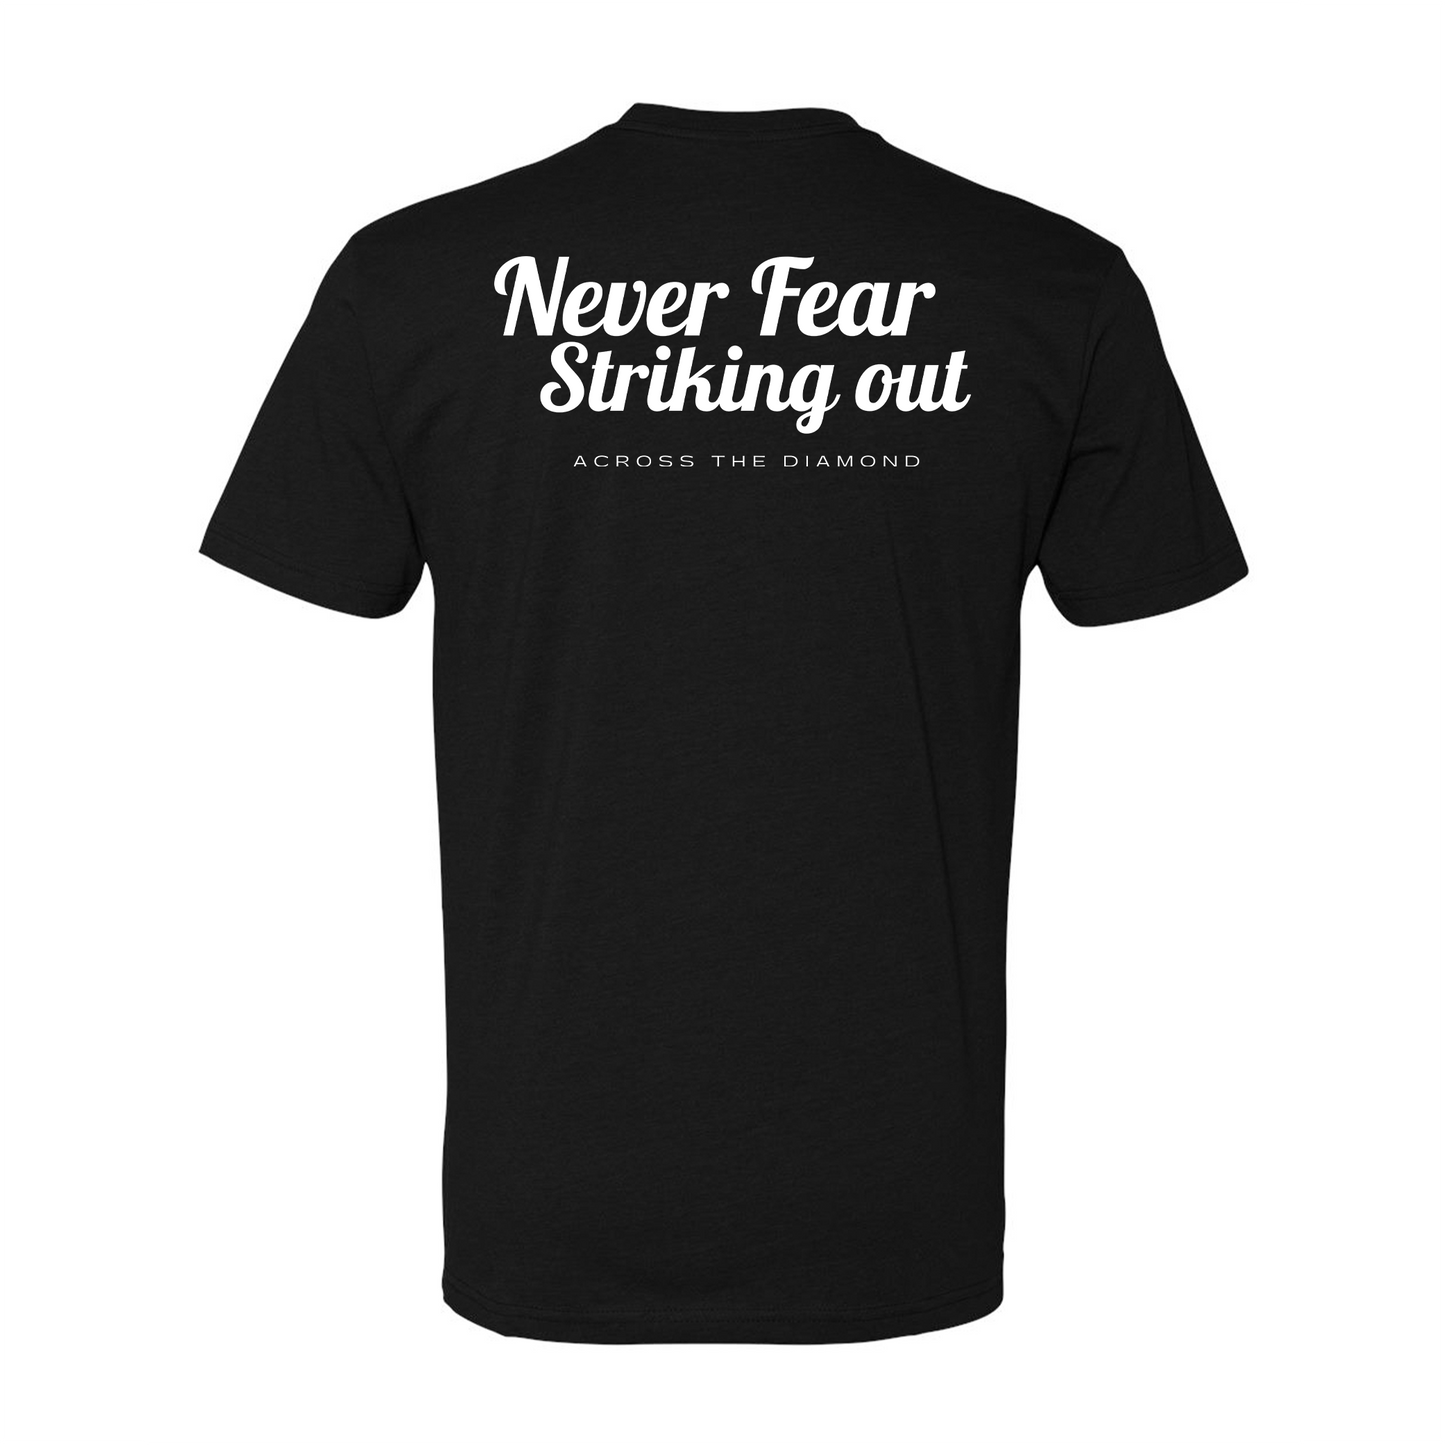 Never Fear Striking Out - Cotton Tee